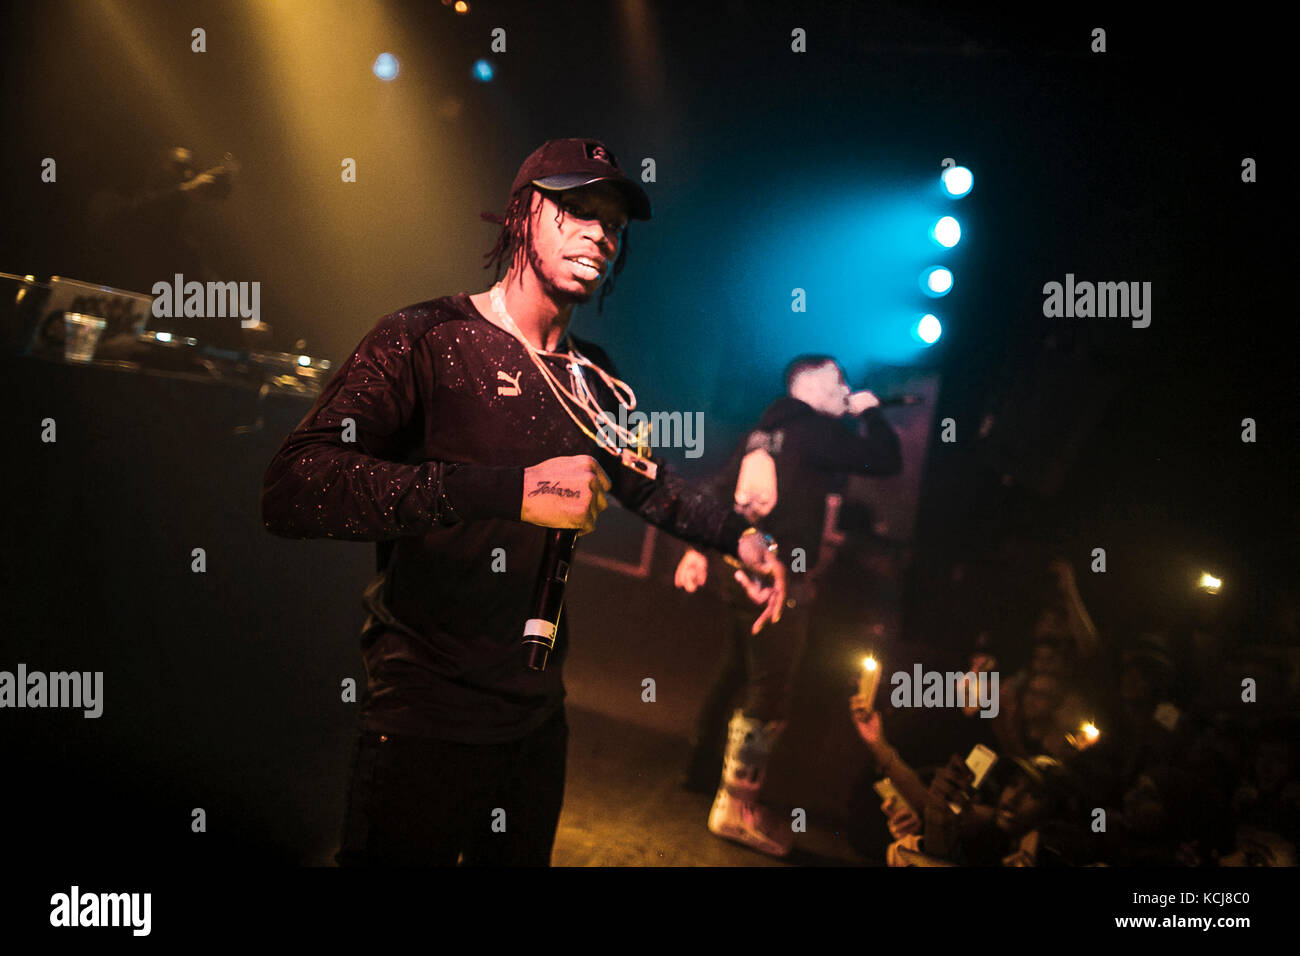 The English hip hop and grime rap duo Krept and Konan performs a live concert at Pumpehuset in Copenhagen. The group consists of the two MC’s Casyo “Krept” Johnson (pictured) and Karl “Konan” Wilson. Denmark, 05/12 2015. Stock Photo